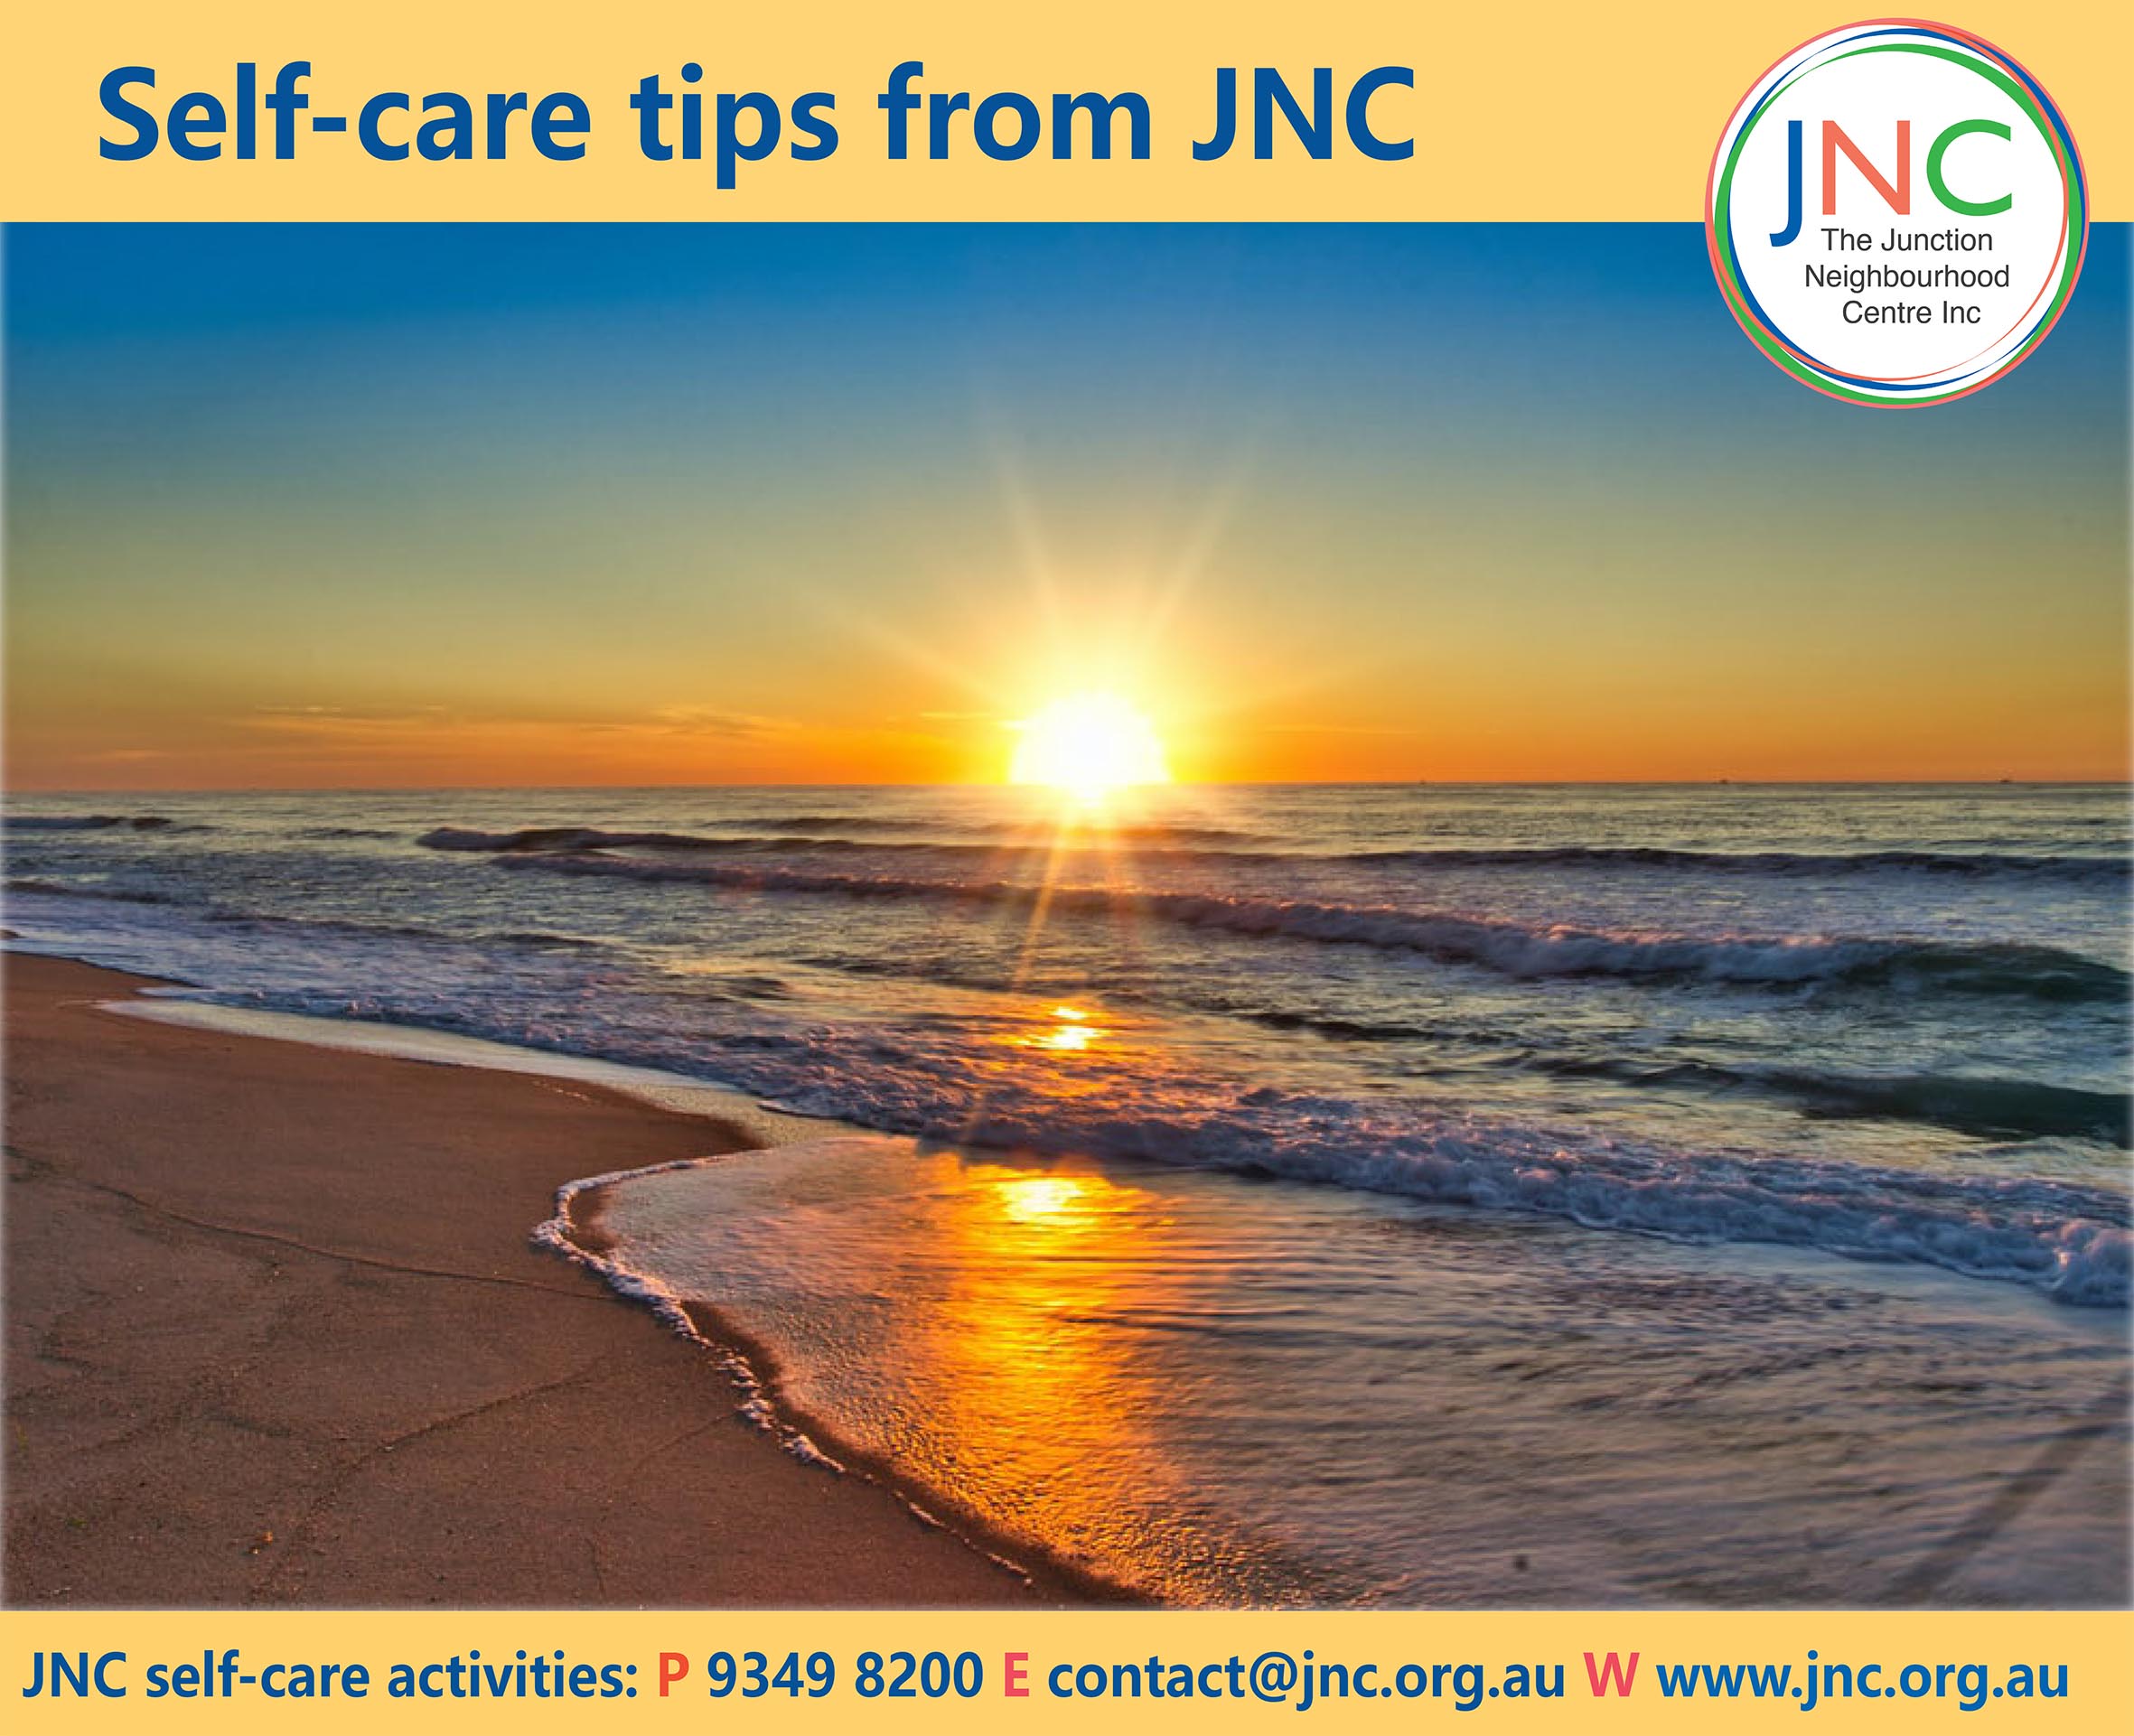 photo of sunrise and words 'self -care tips from JNC'